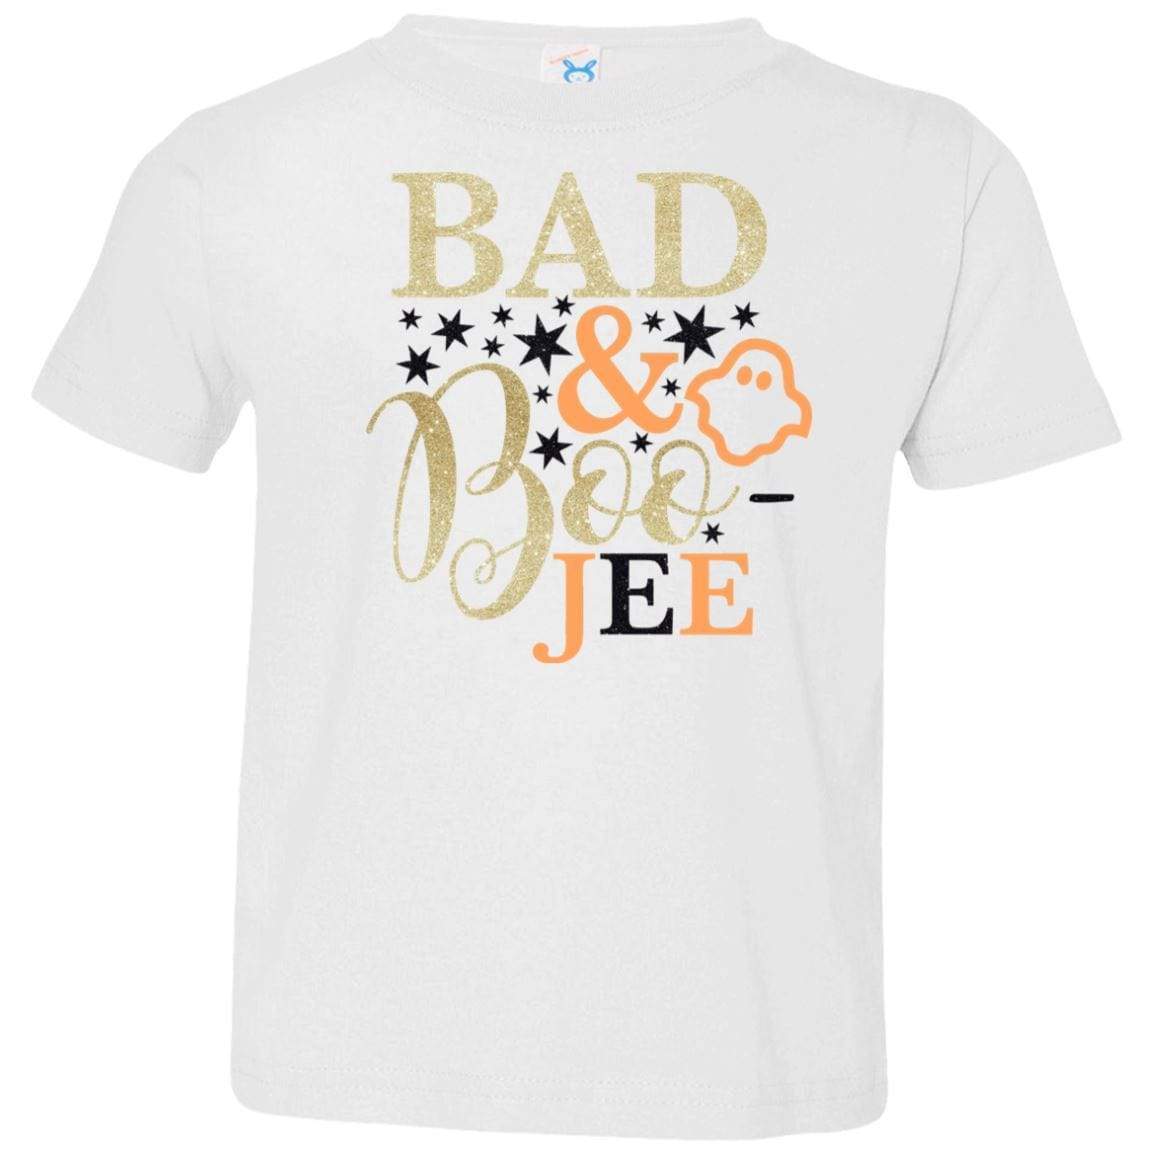 Bad and Boojee Toddler Shirt T-Shirts CustomCat White 2T 